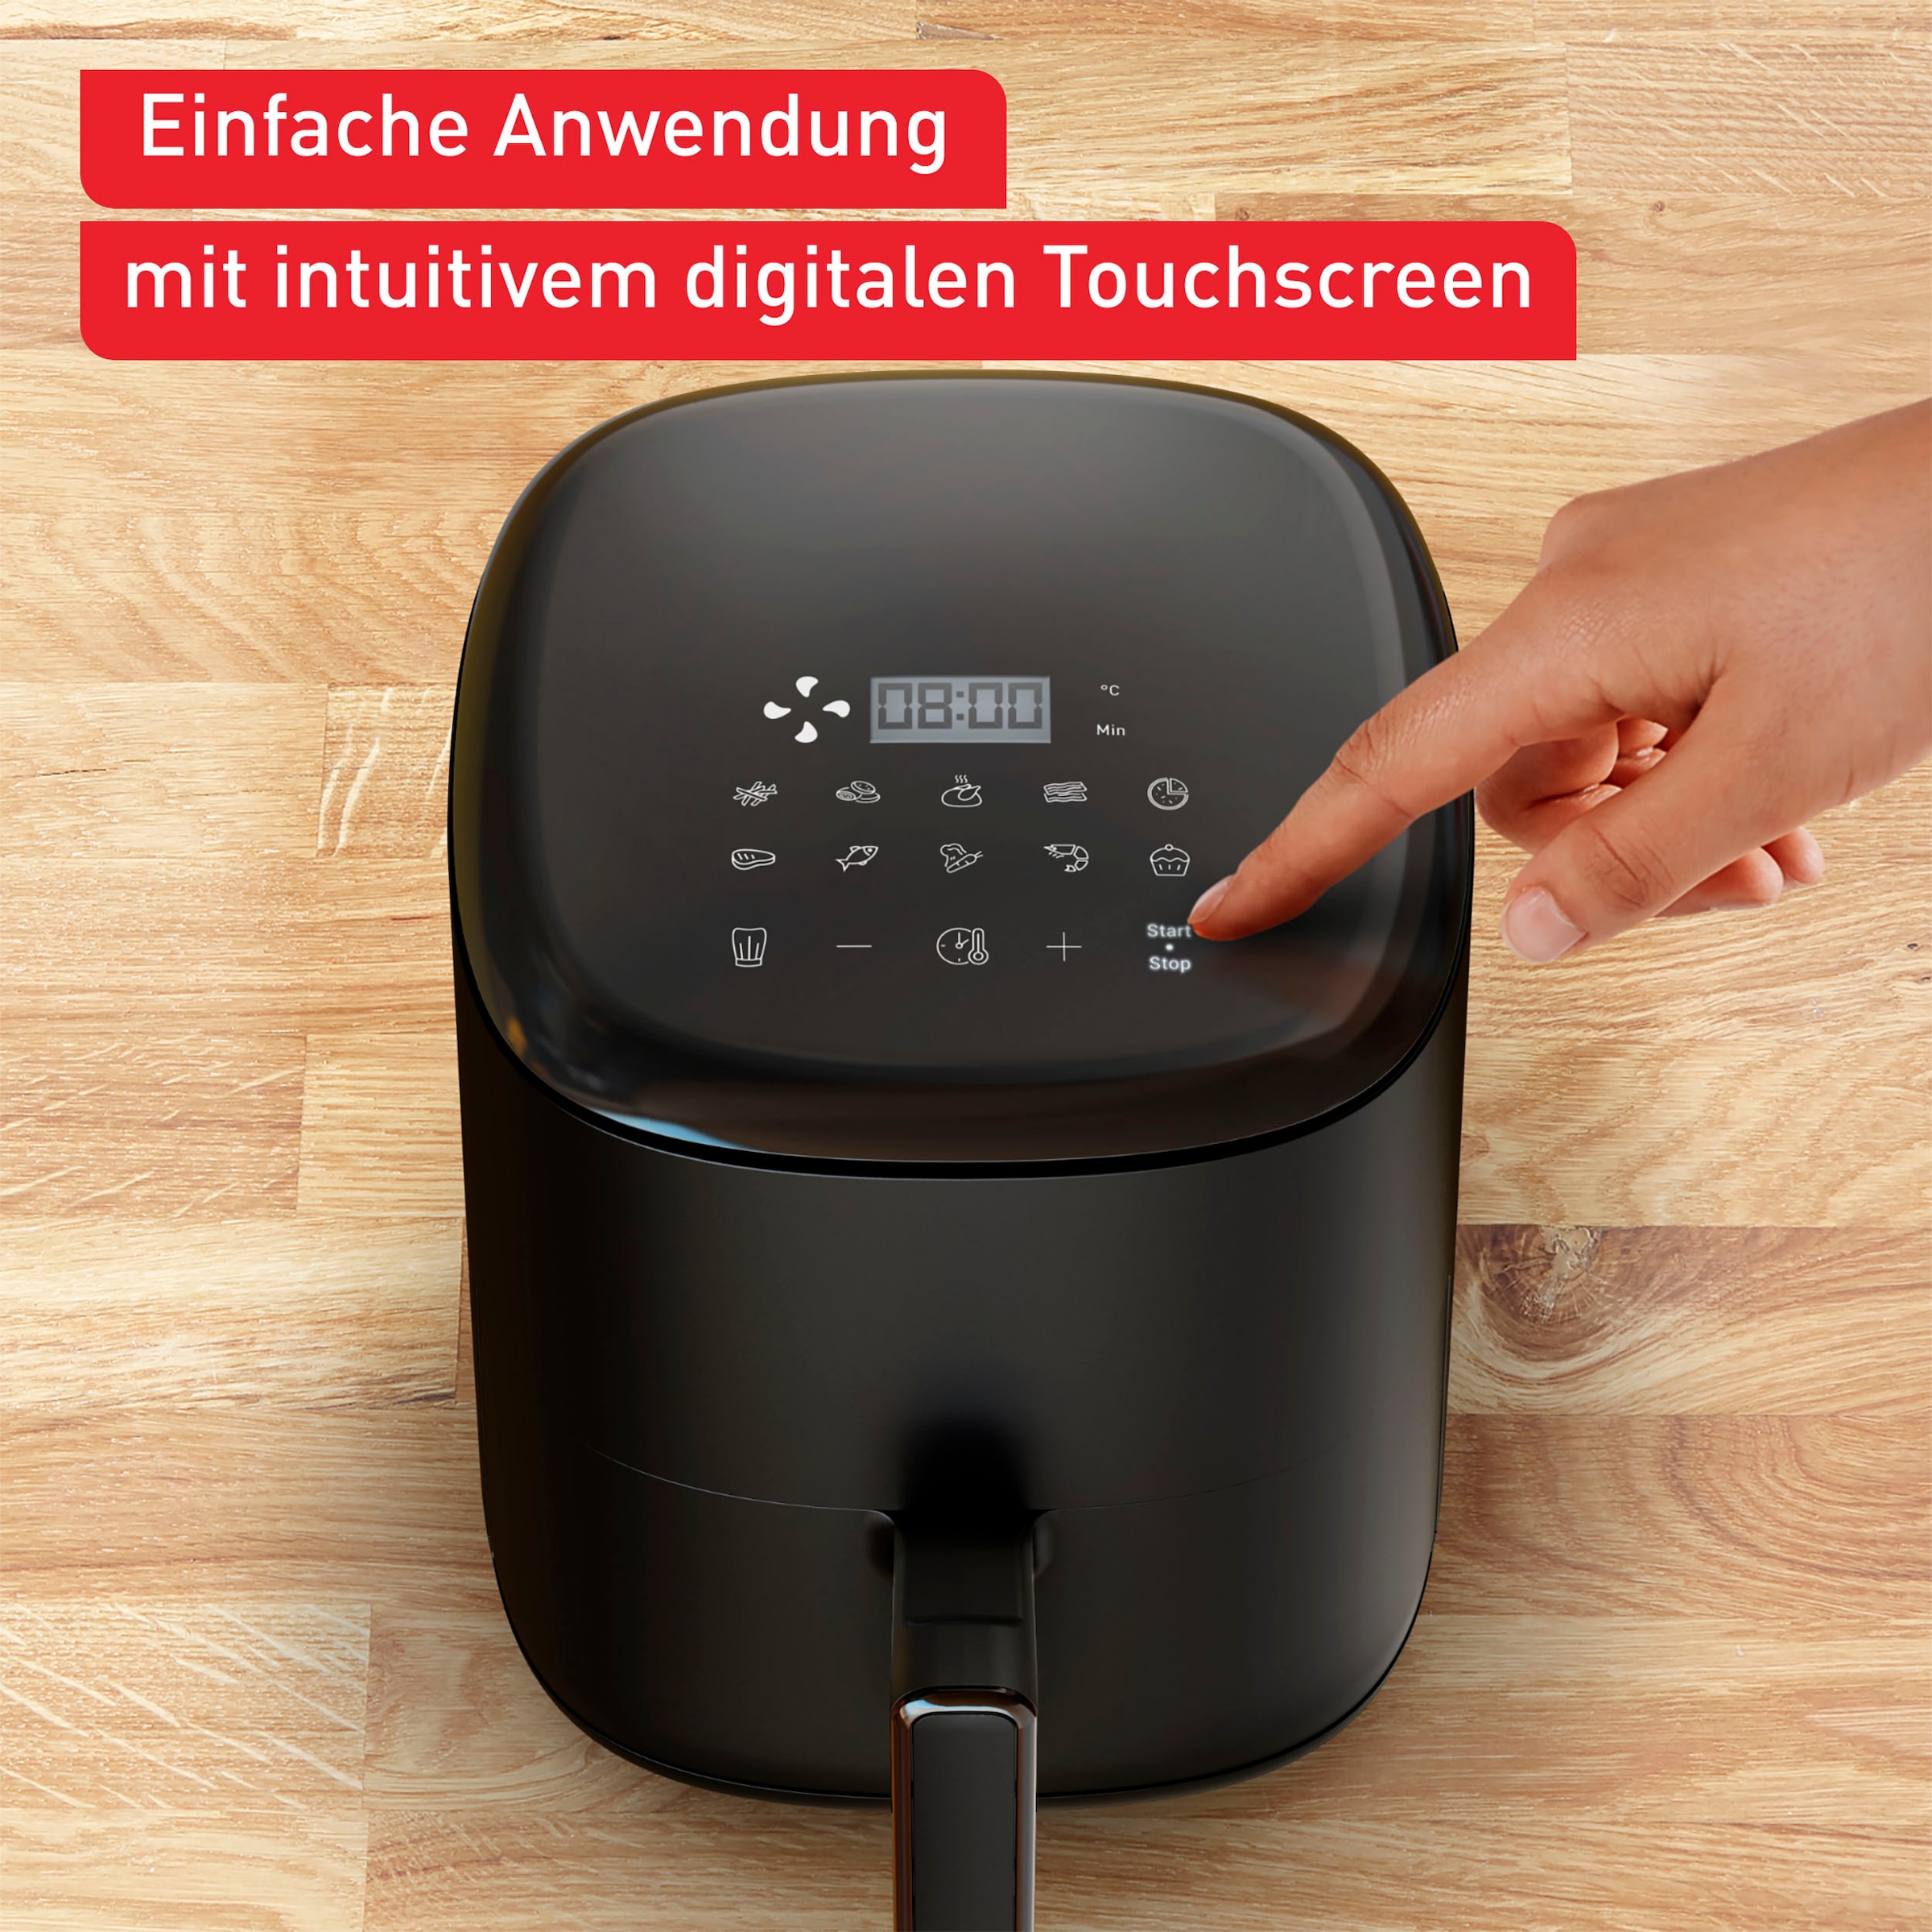 Tefal Heißluftfritteuse »EY1458 Easy Online Compact«, OTTO 1300 im Fry Shop W